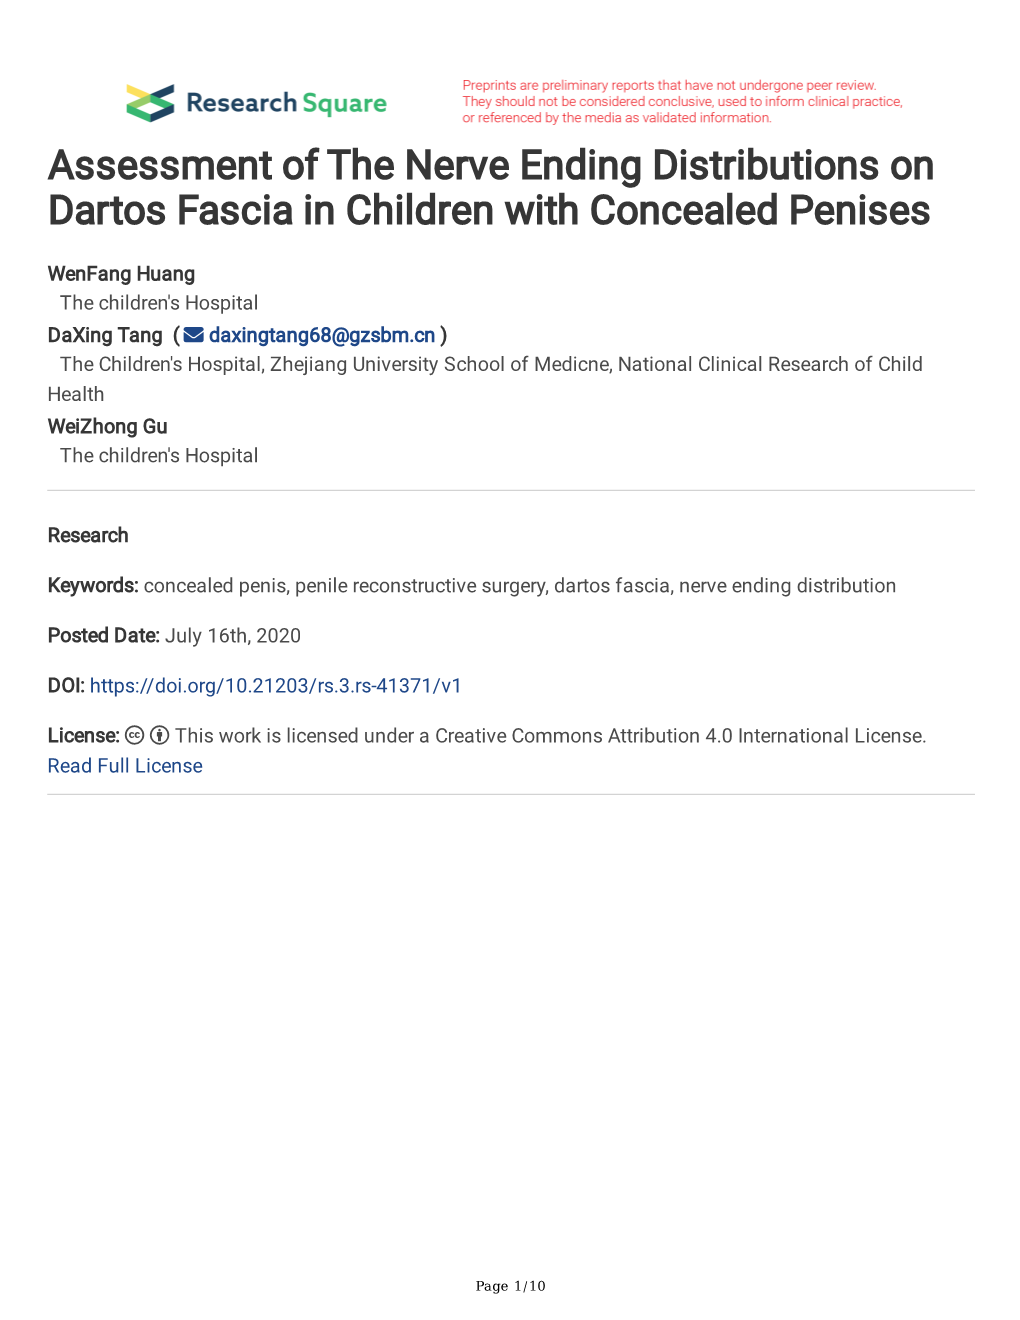 Assessment of the Nerve Ending Distributions on Dartos Fascia in Children with Concealed Penises